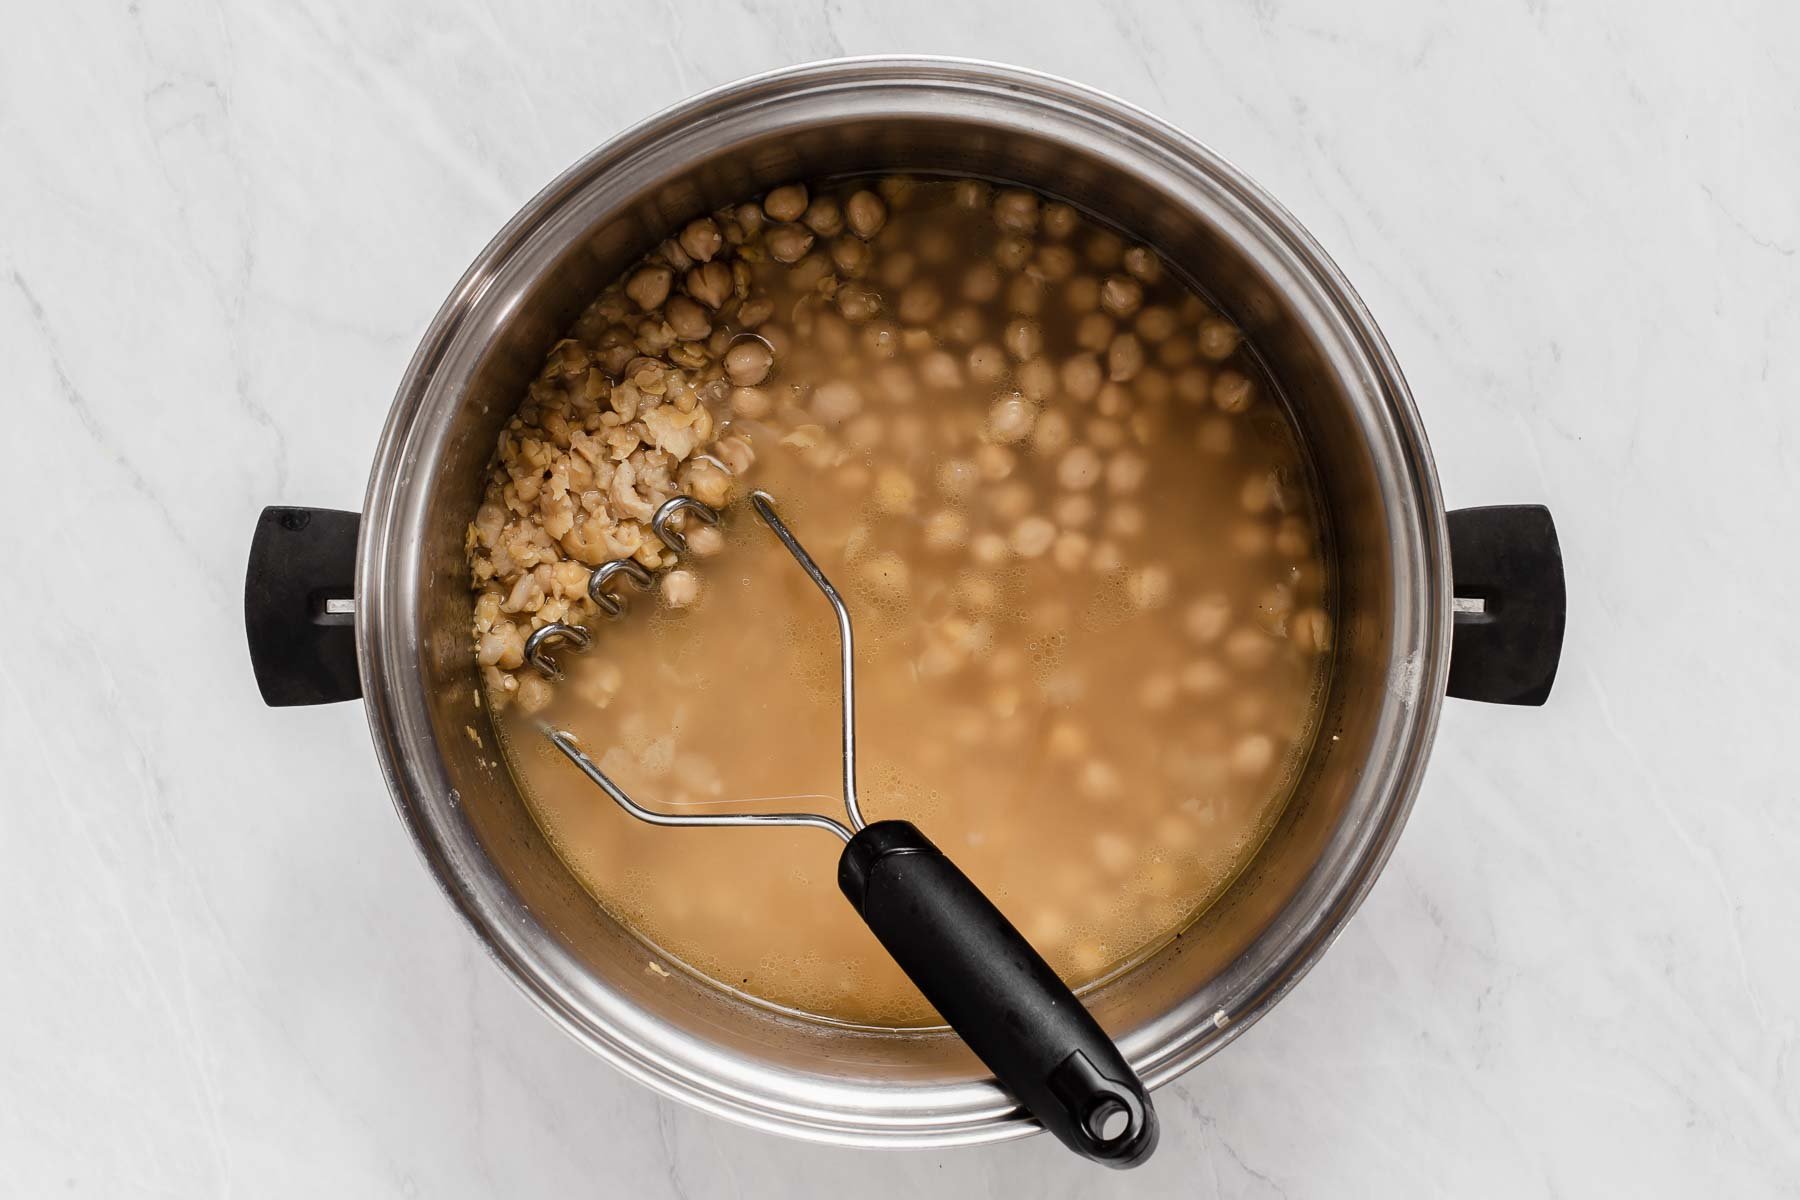 Soup pot with chickpeas and potato masher.